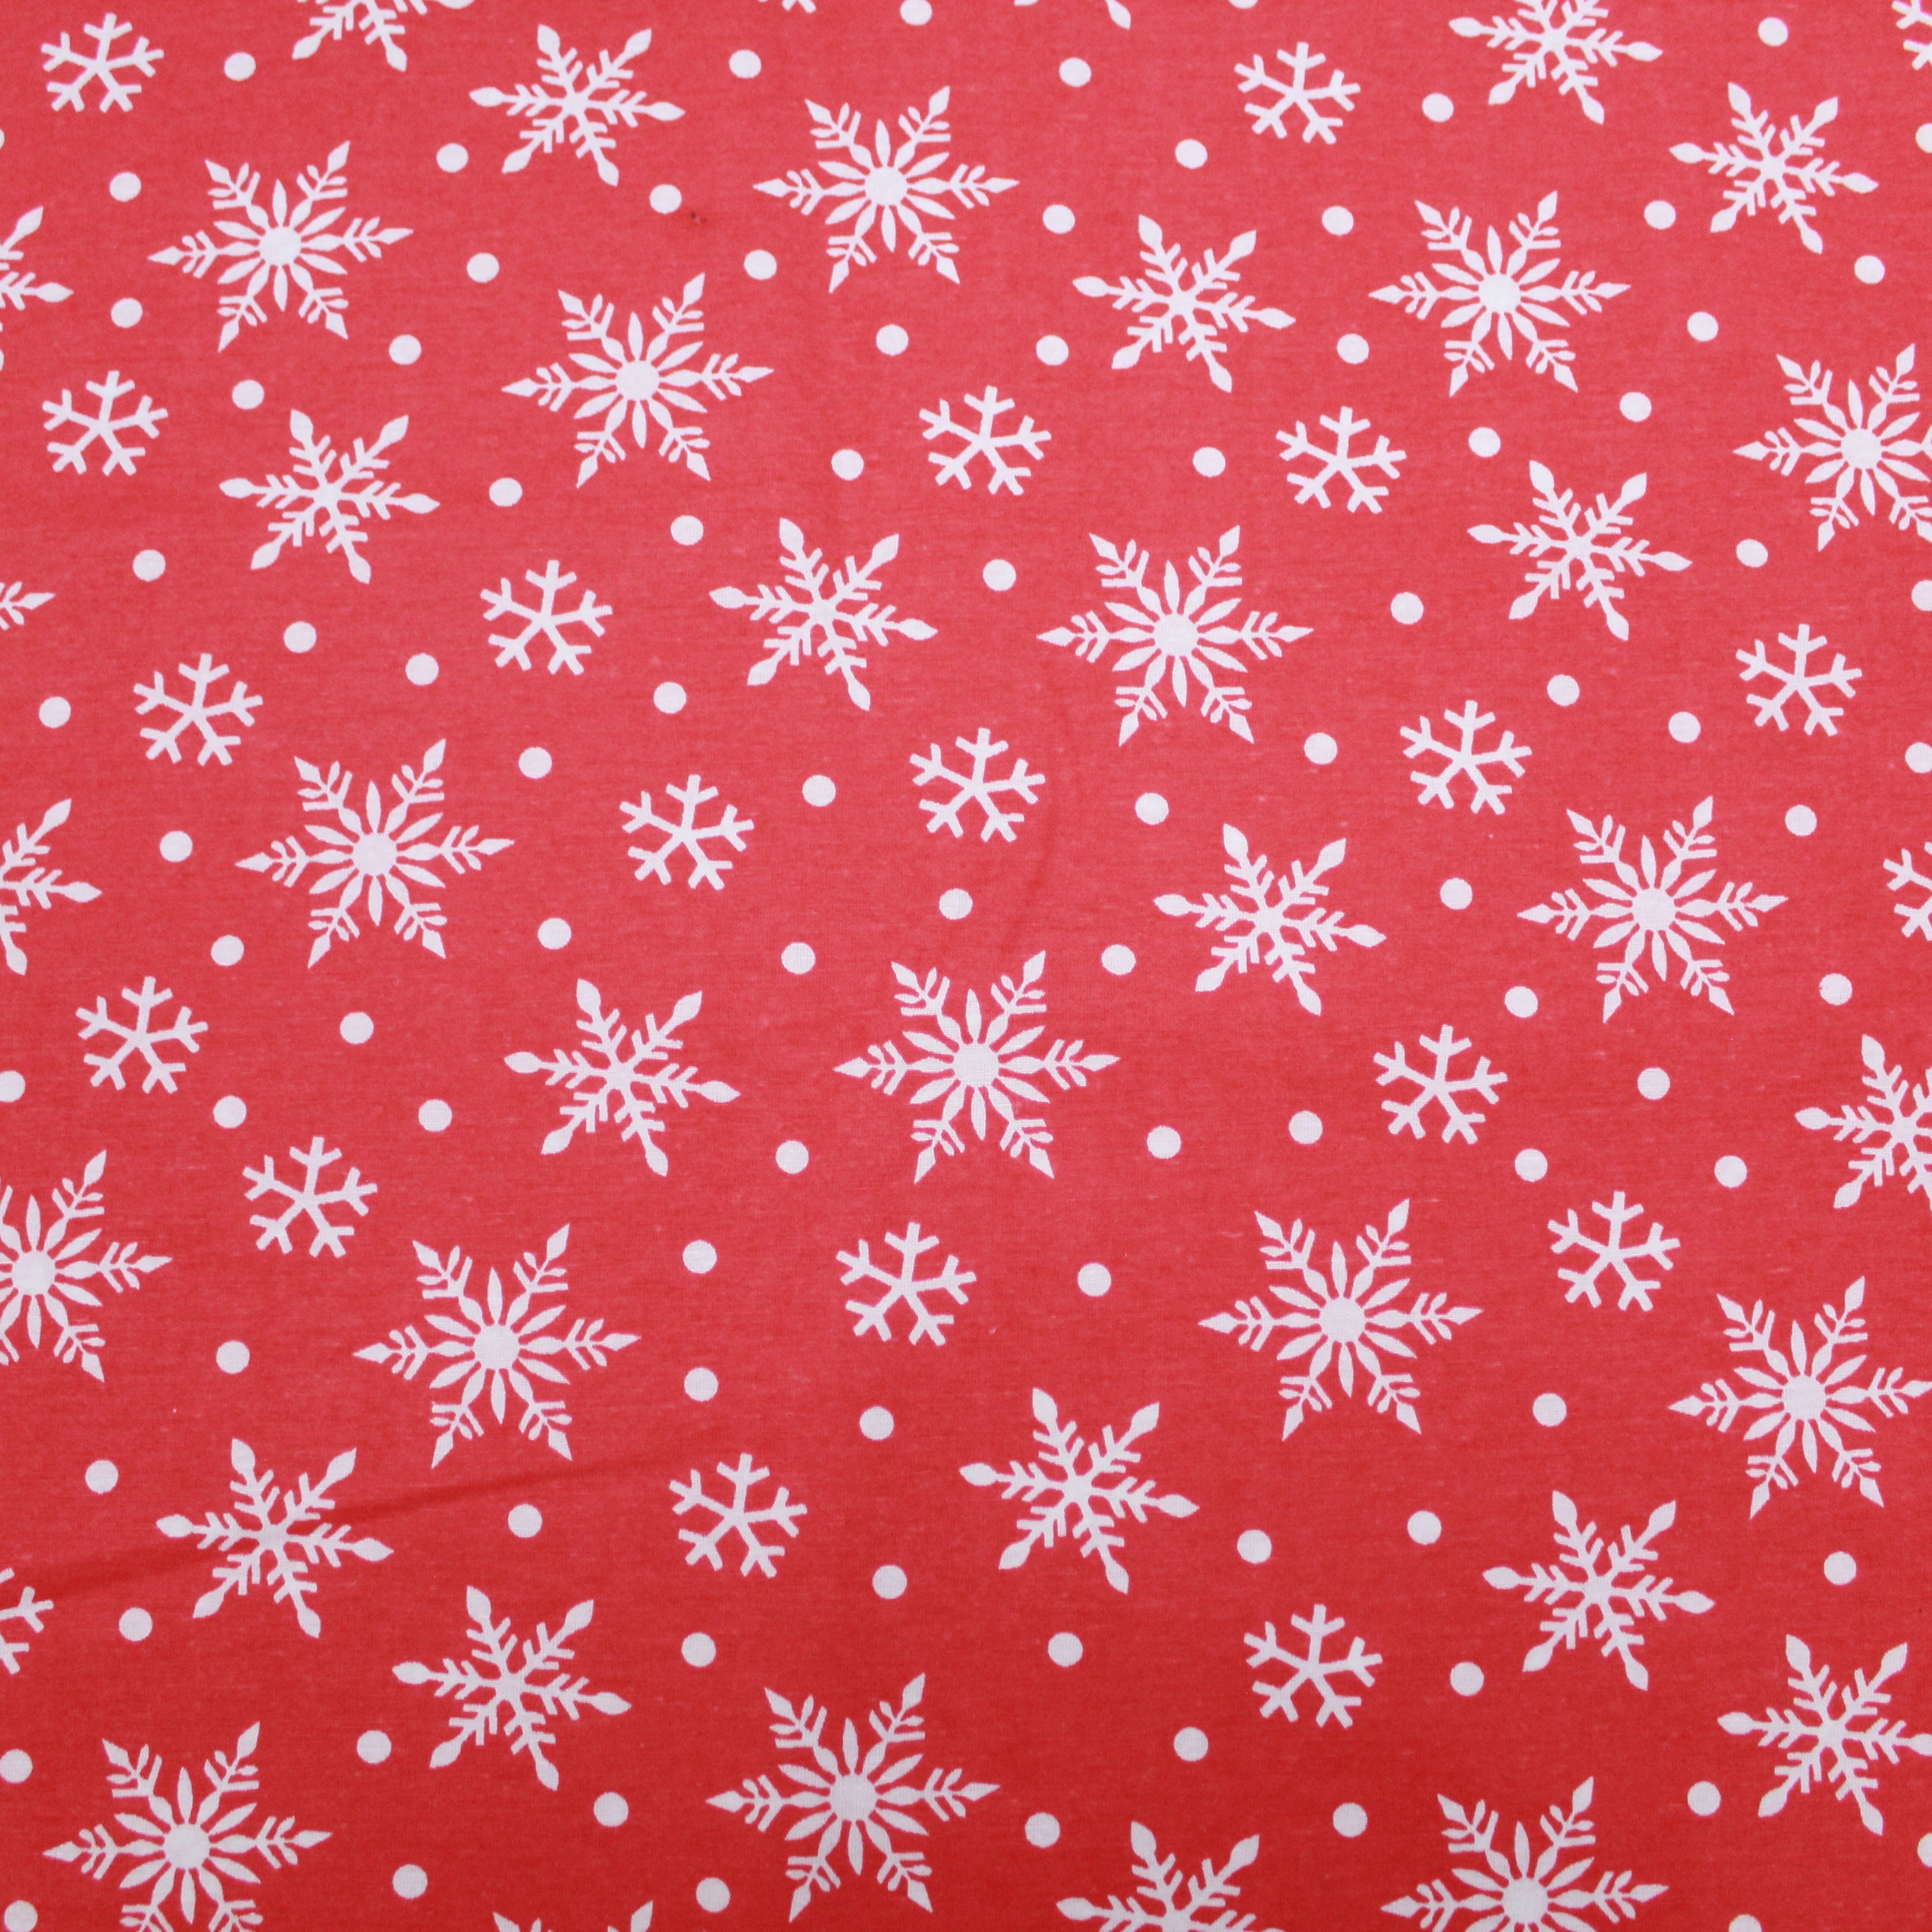 Premium Quality Super Wide Cotton Blend Sheeting "White On Red Snowflake" 94" Wide Red